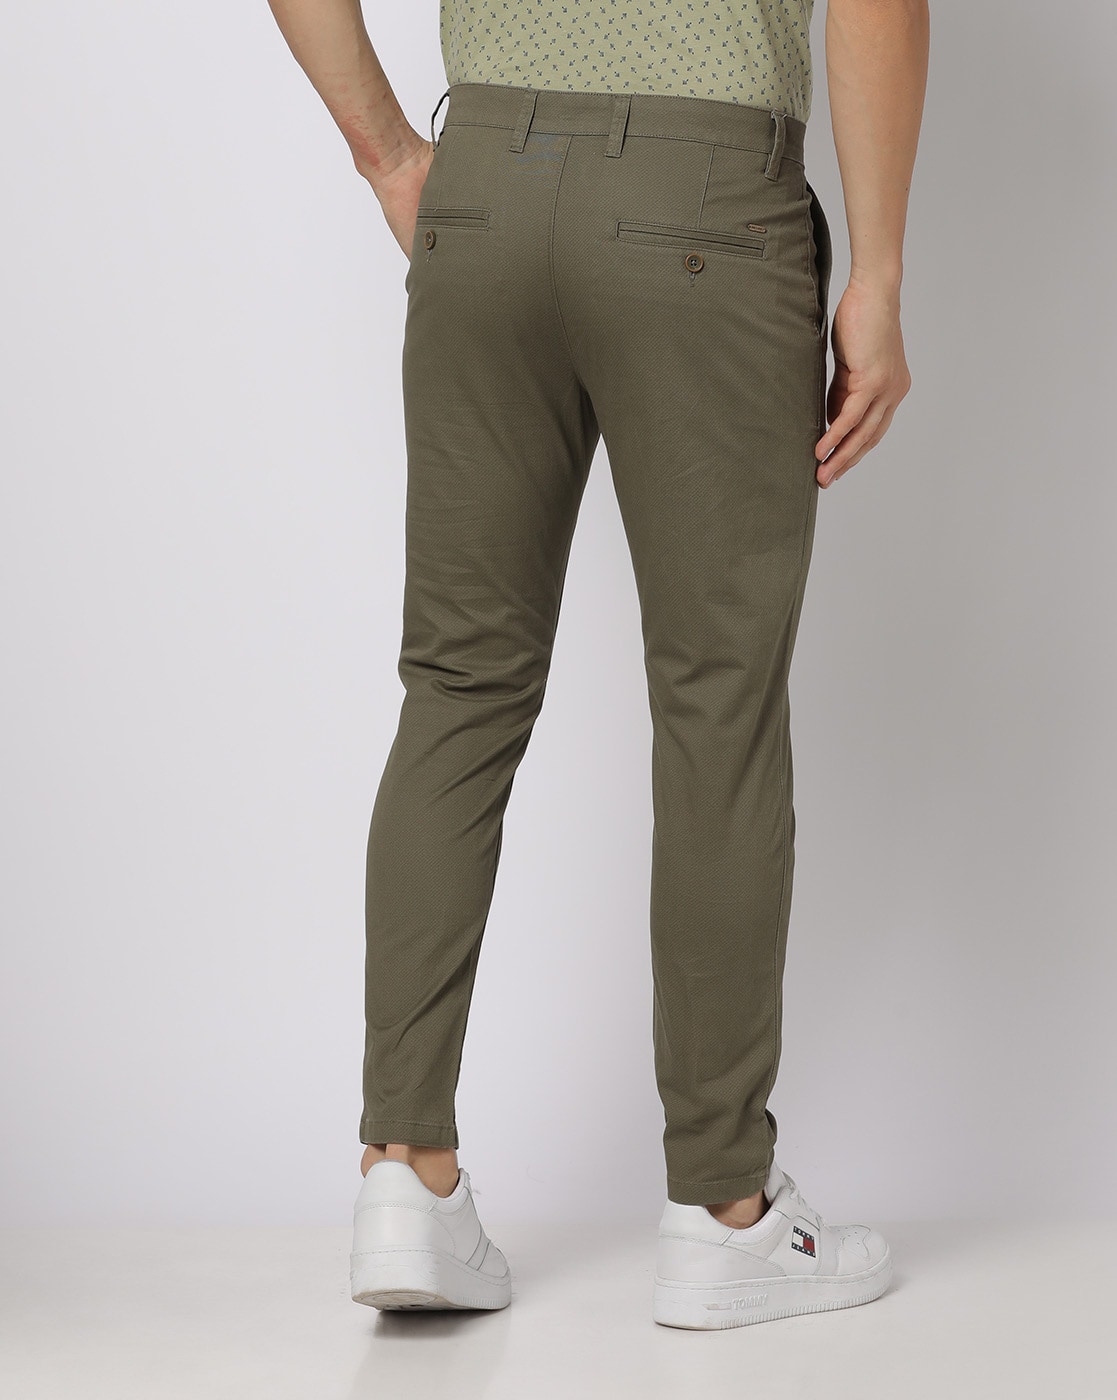 Cord Trousers in Dark Green — C.D. Rigden & Son Country Classics